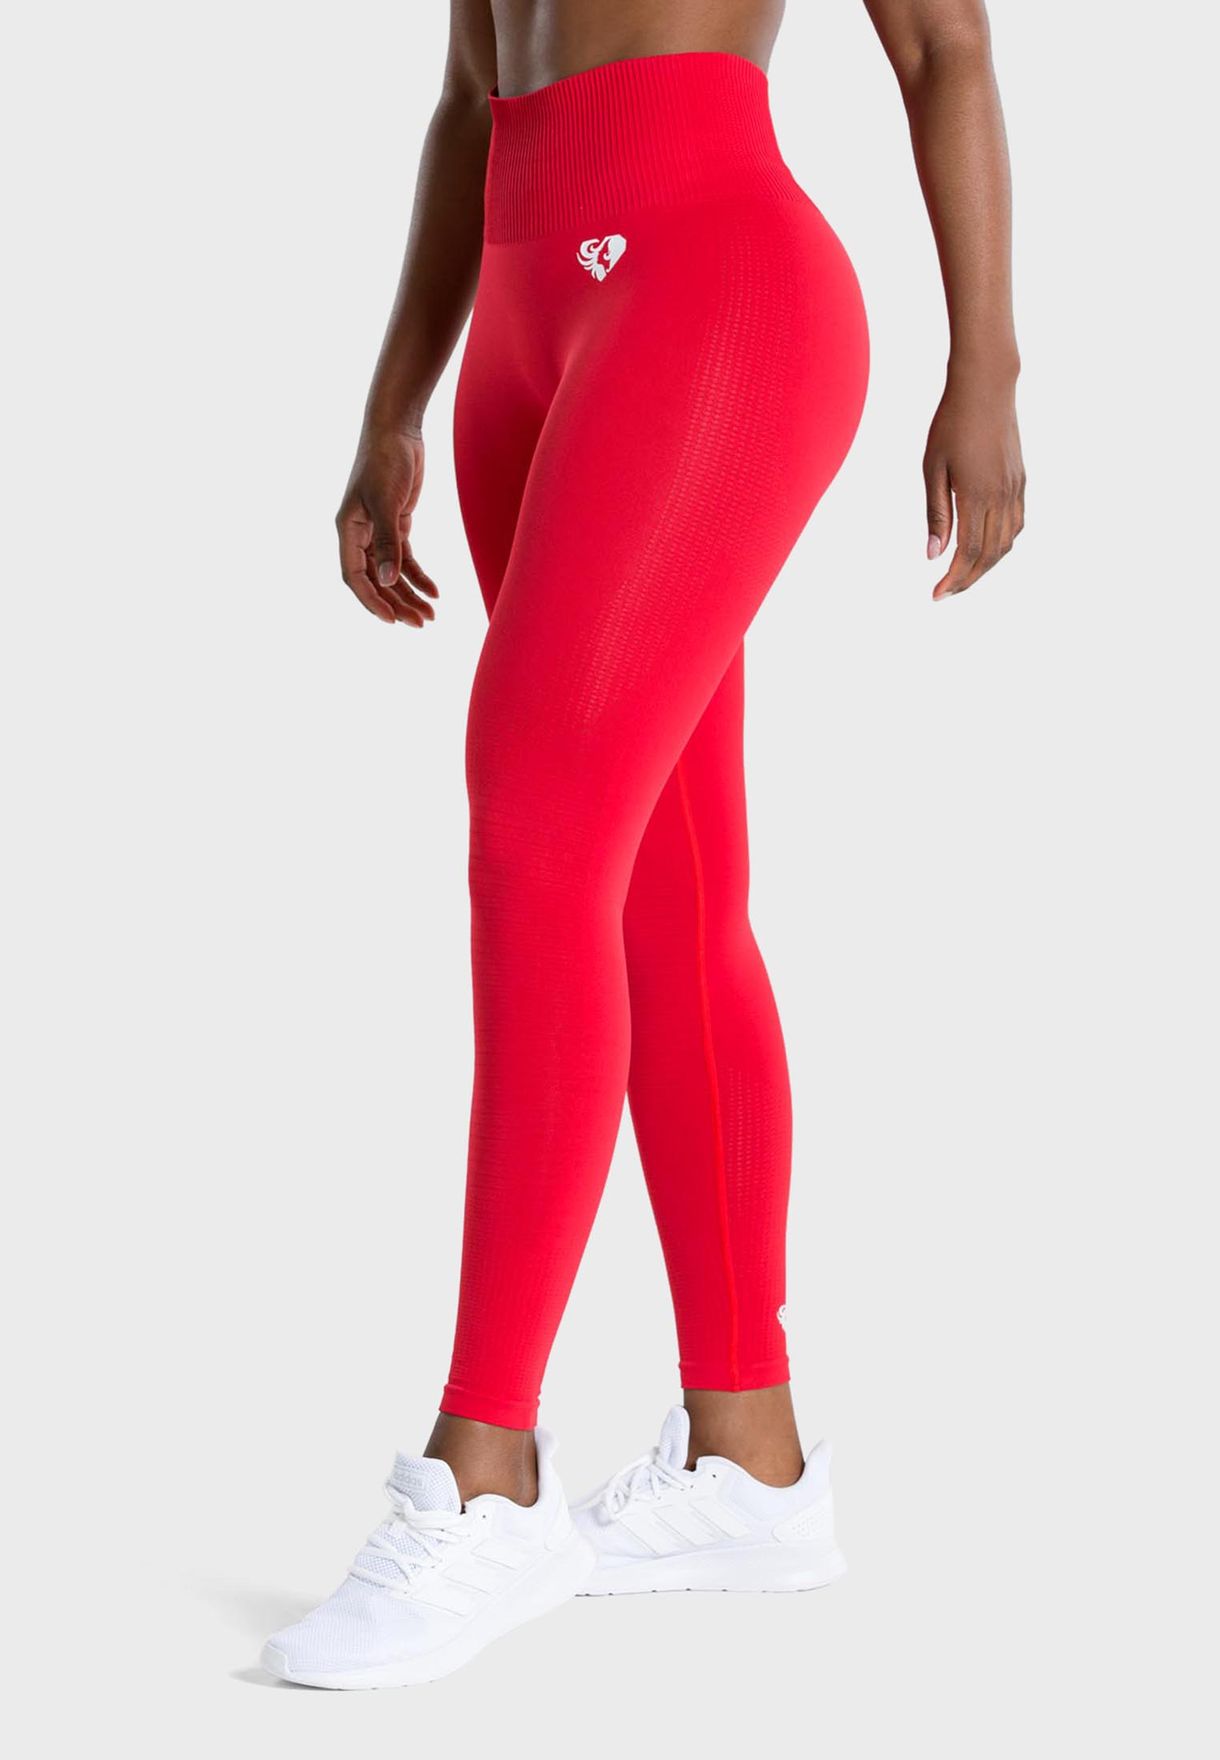 Buy Womens Best red Power Seamless Tights for Kids MENA, Worldwide